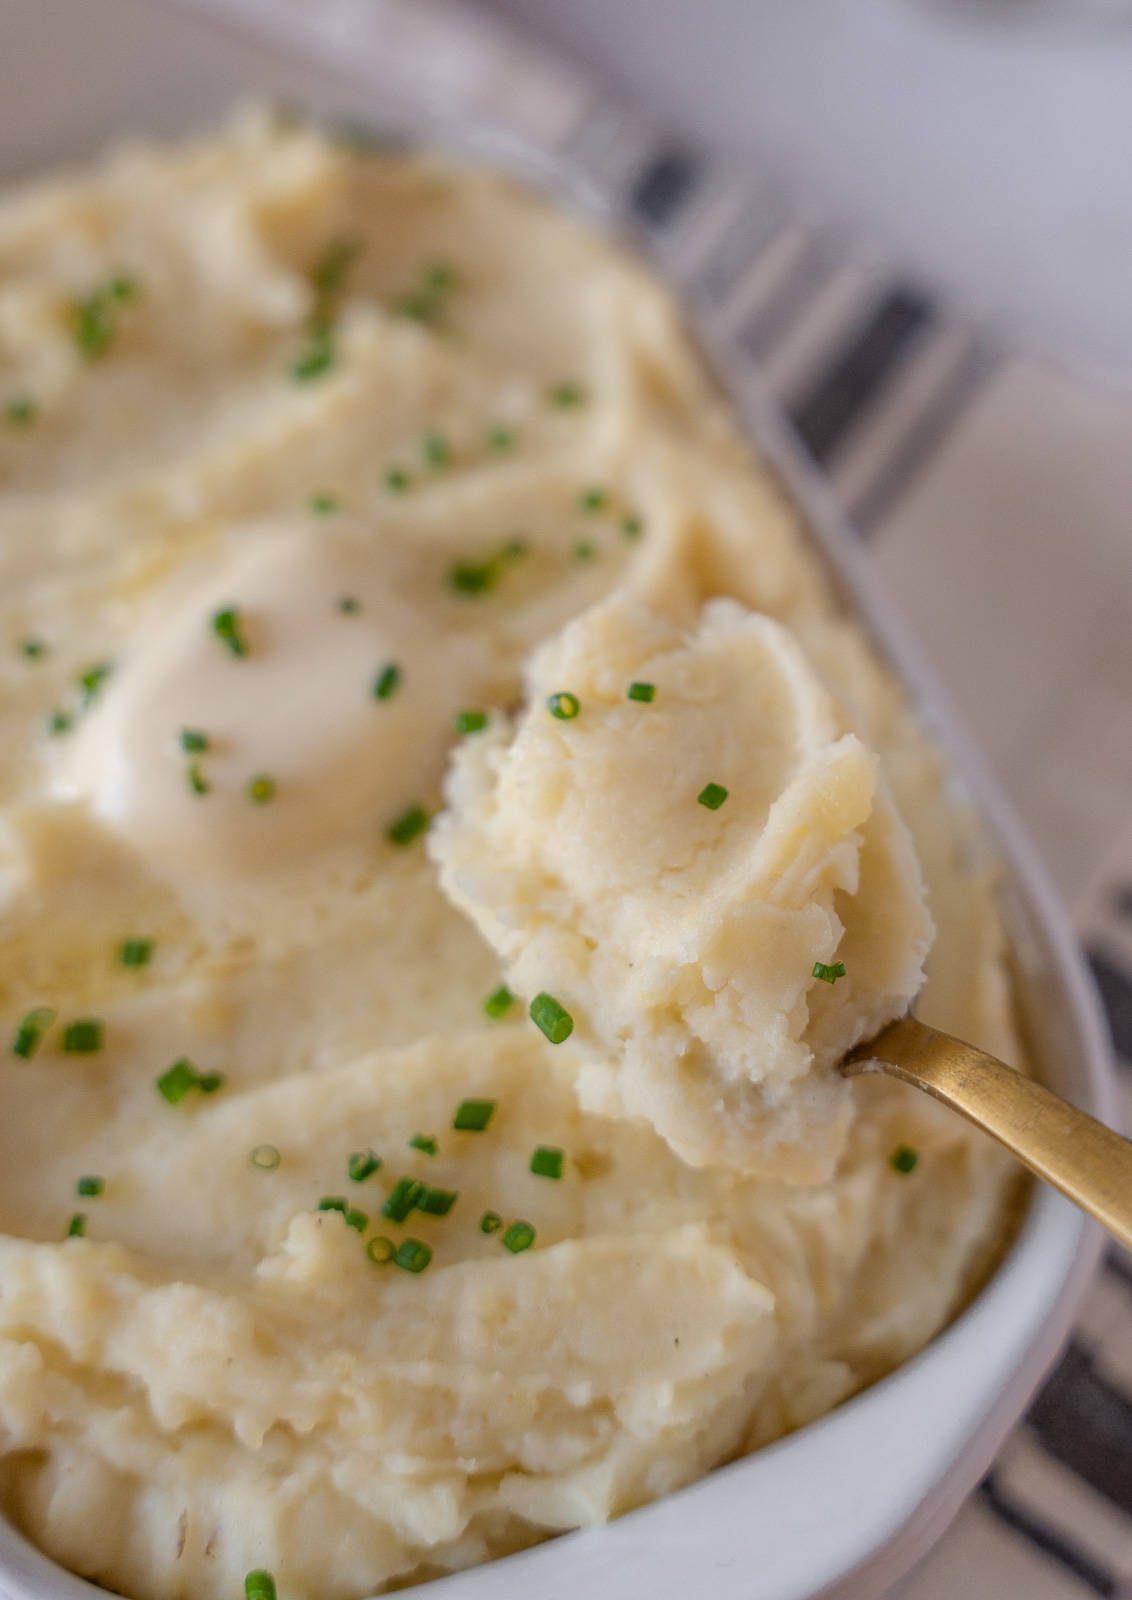 A gold spoon holding some mashed potatoes.